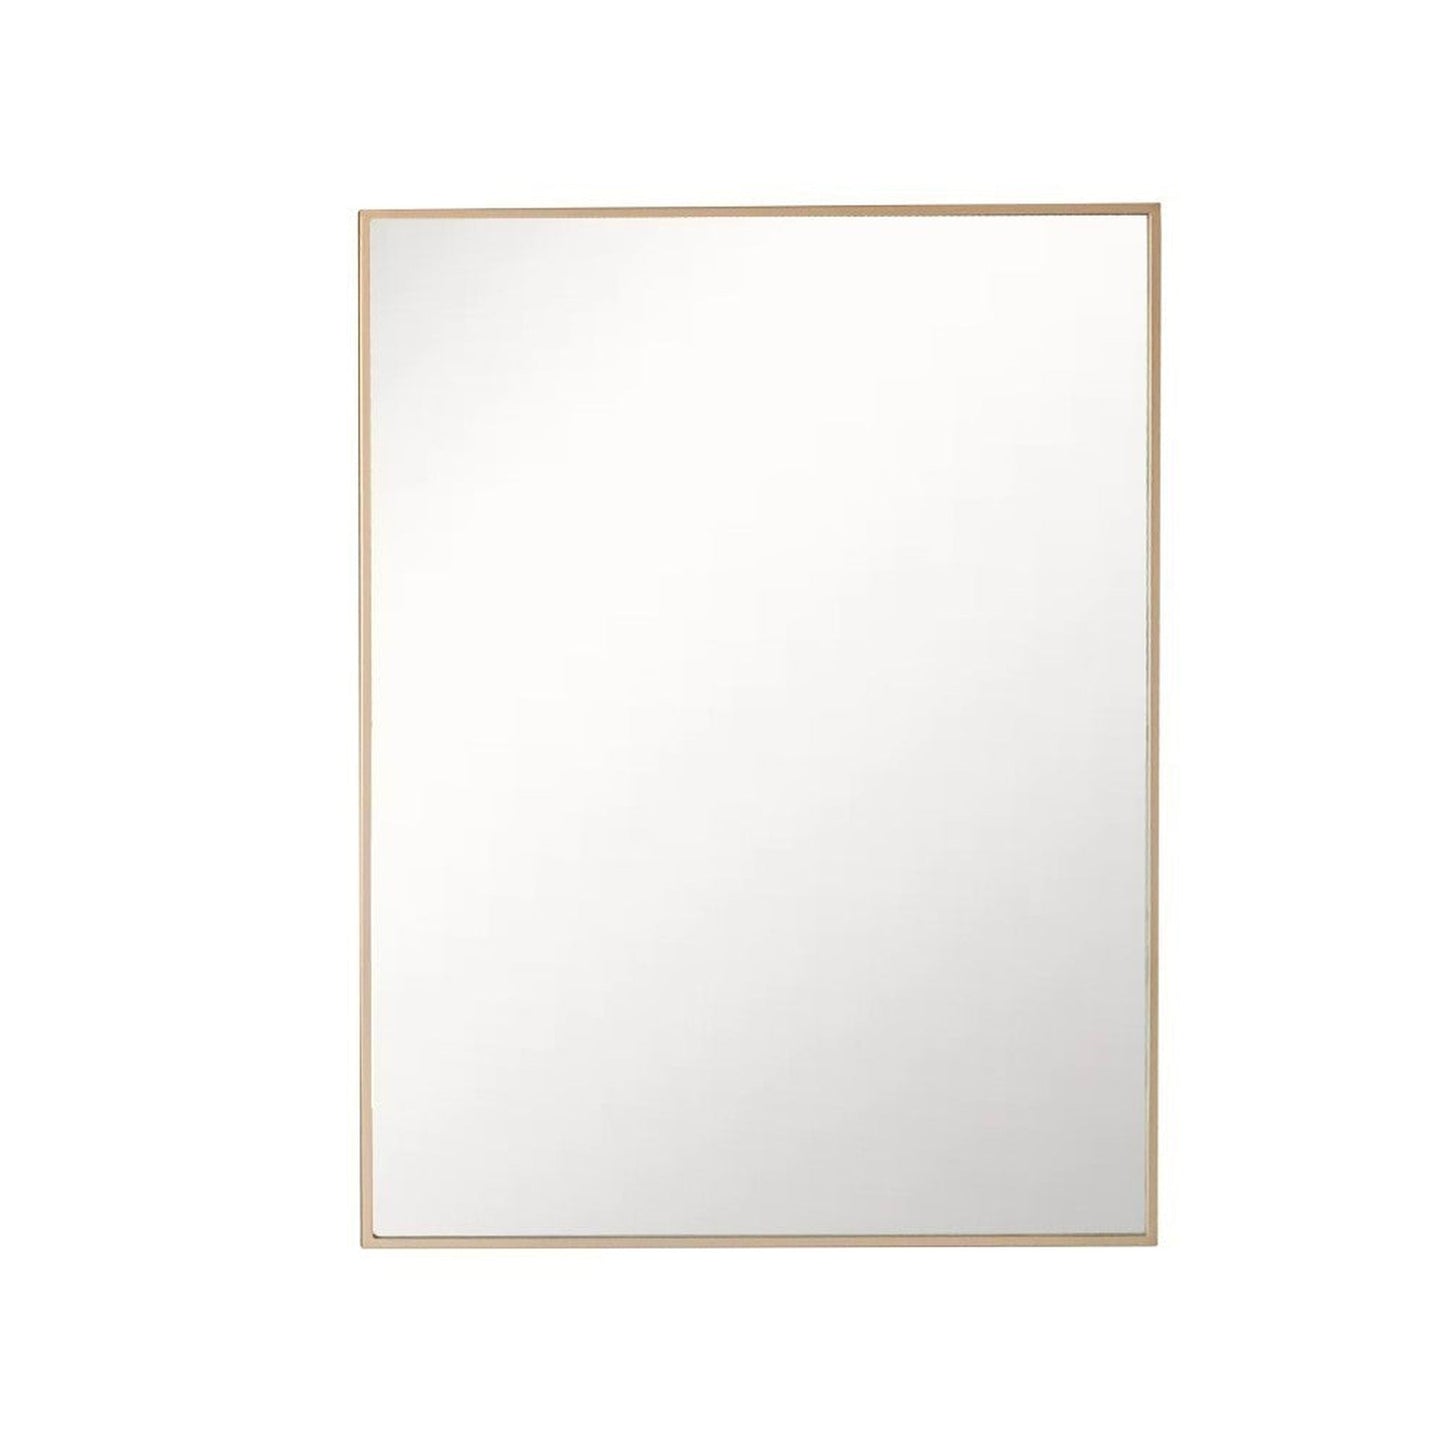 Bellaterra Home 24" x 28" Gold Rectangle Wall-Mounted Steel Framed Mirror With Straight Edges